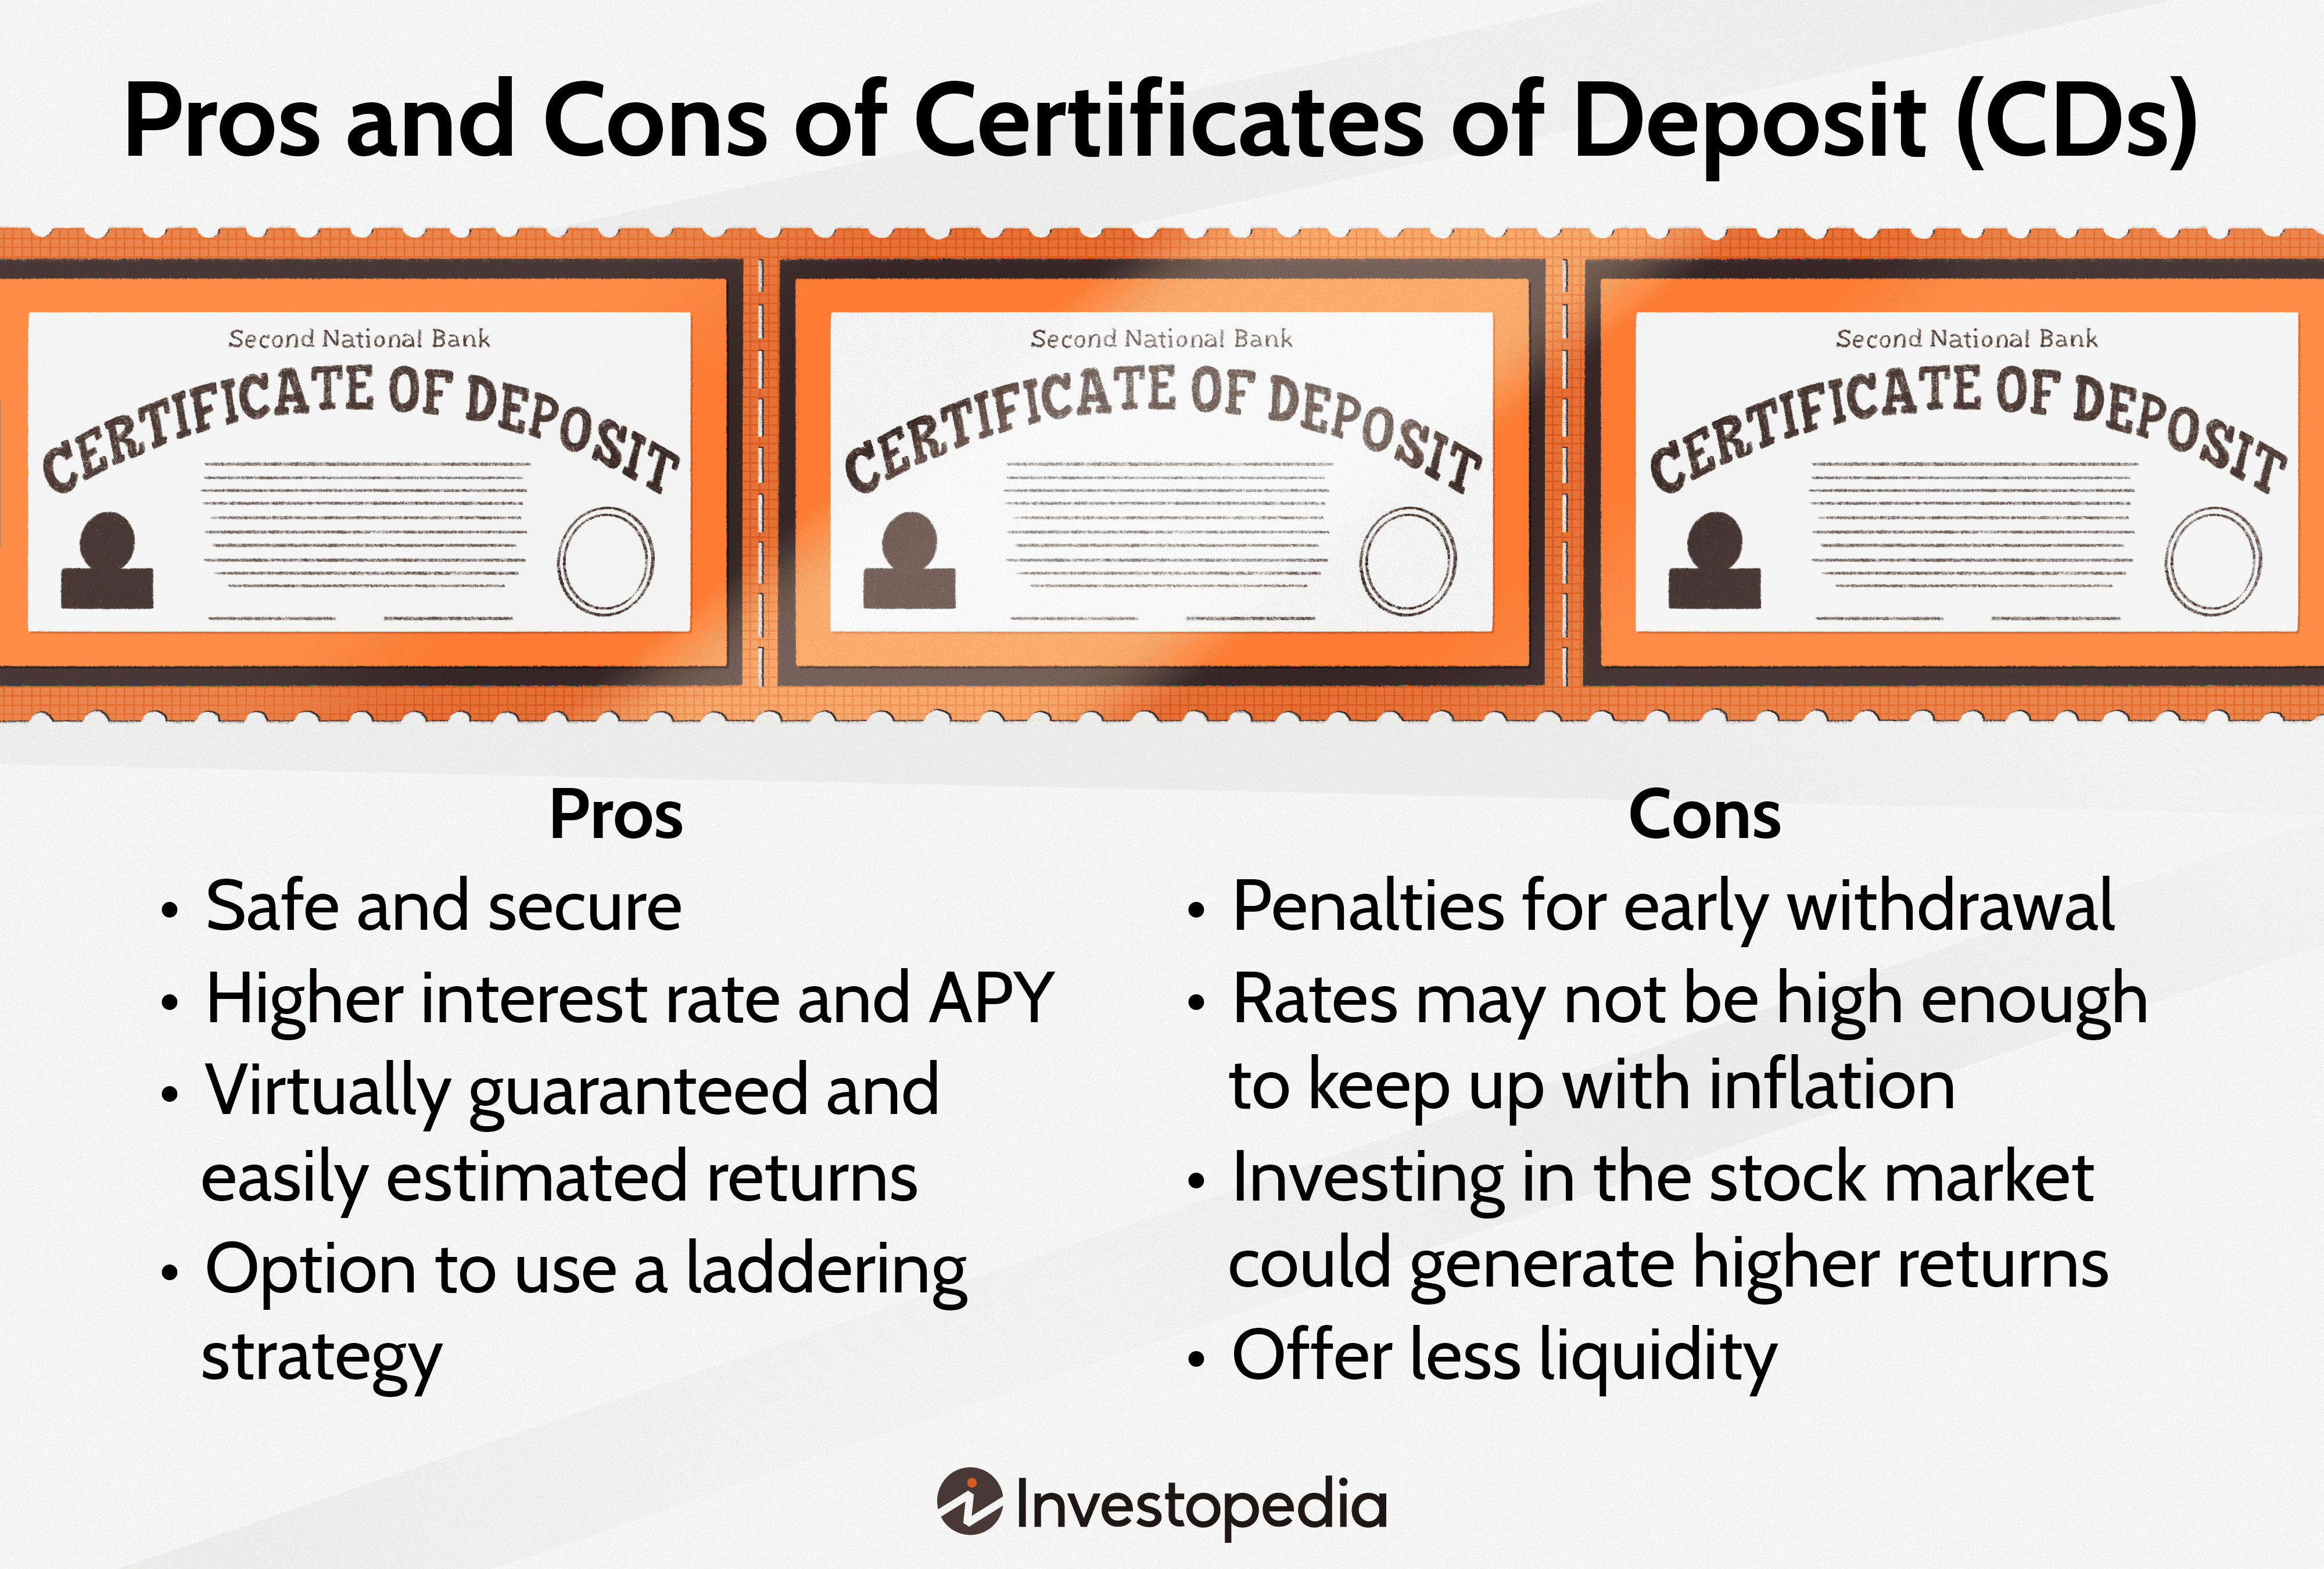 Pros and Cons of Certificates of Deposit (CDs)